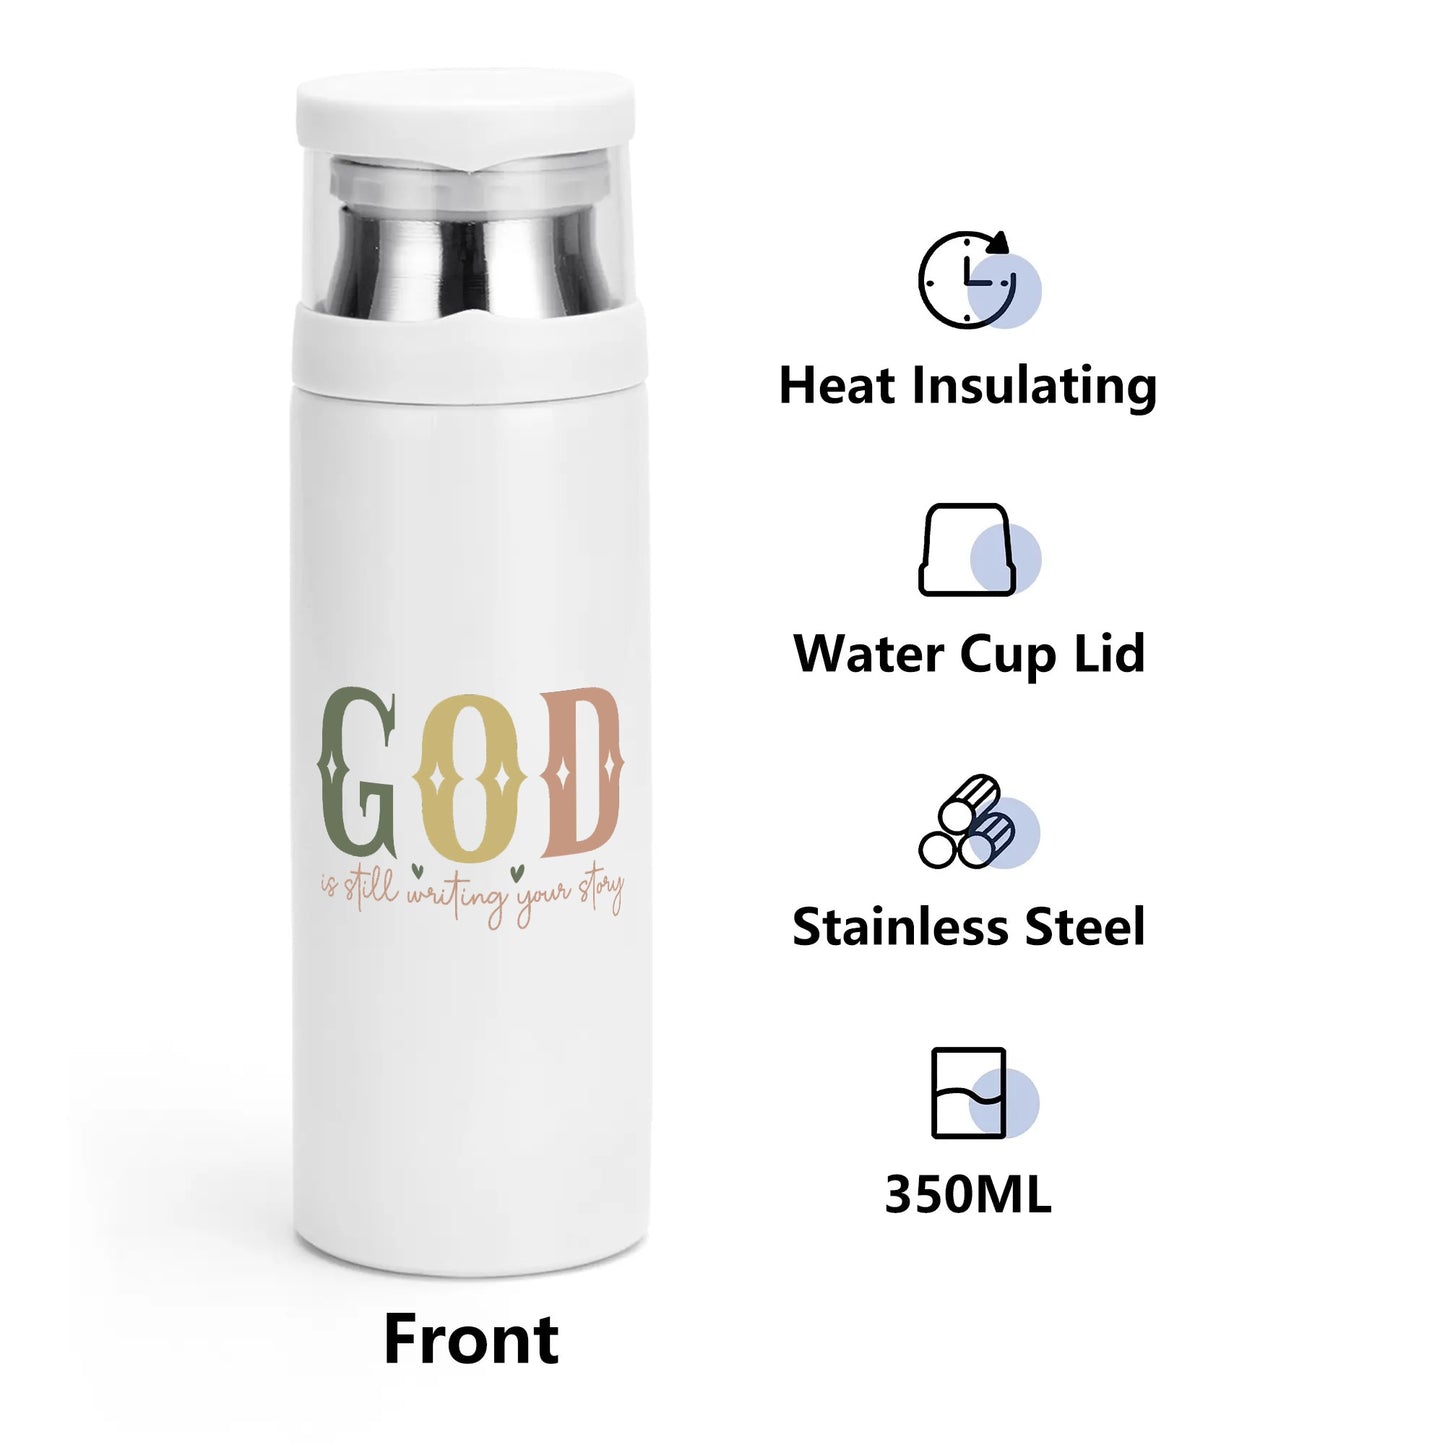 God Is Still Writing Your Story Christian Vacuum Bottle with Cup popcustoms